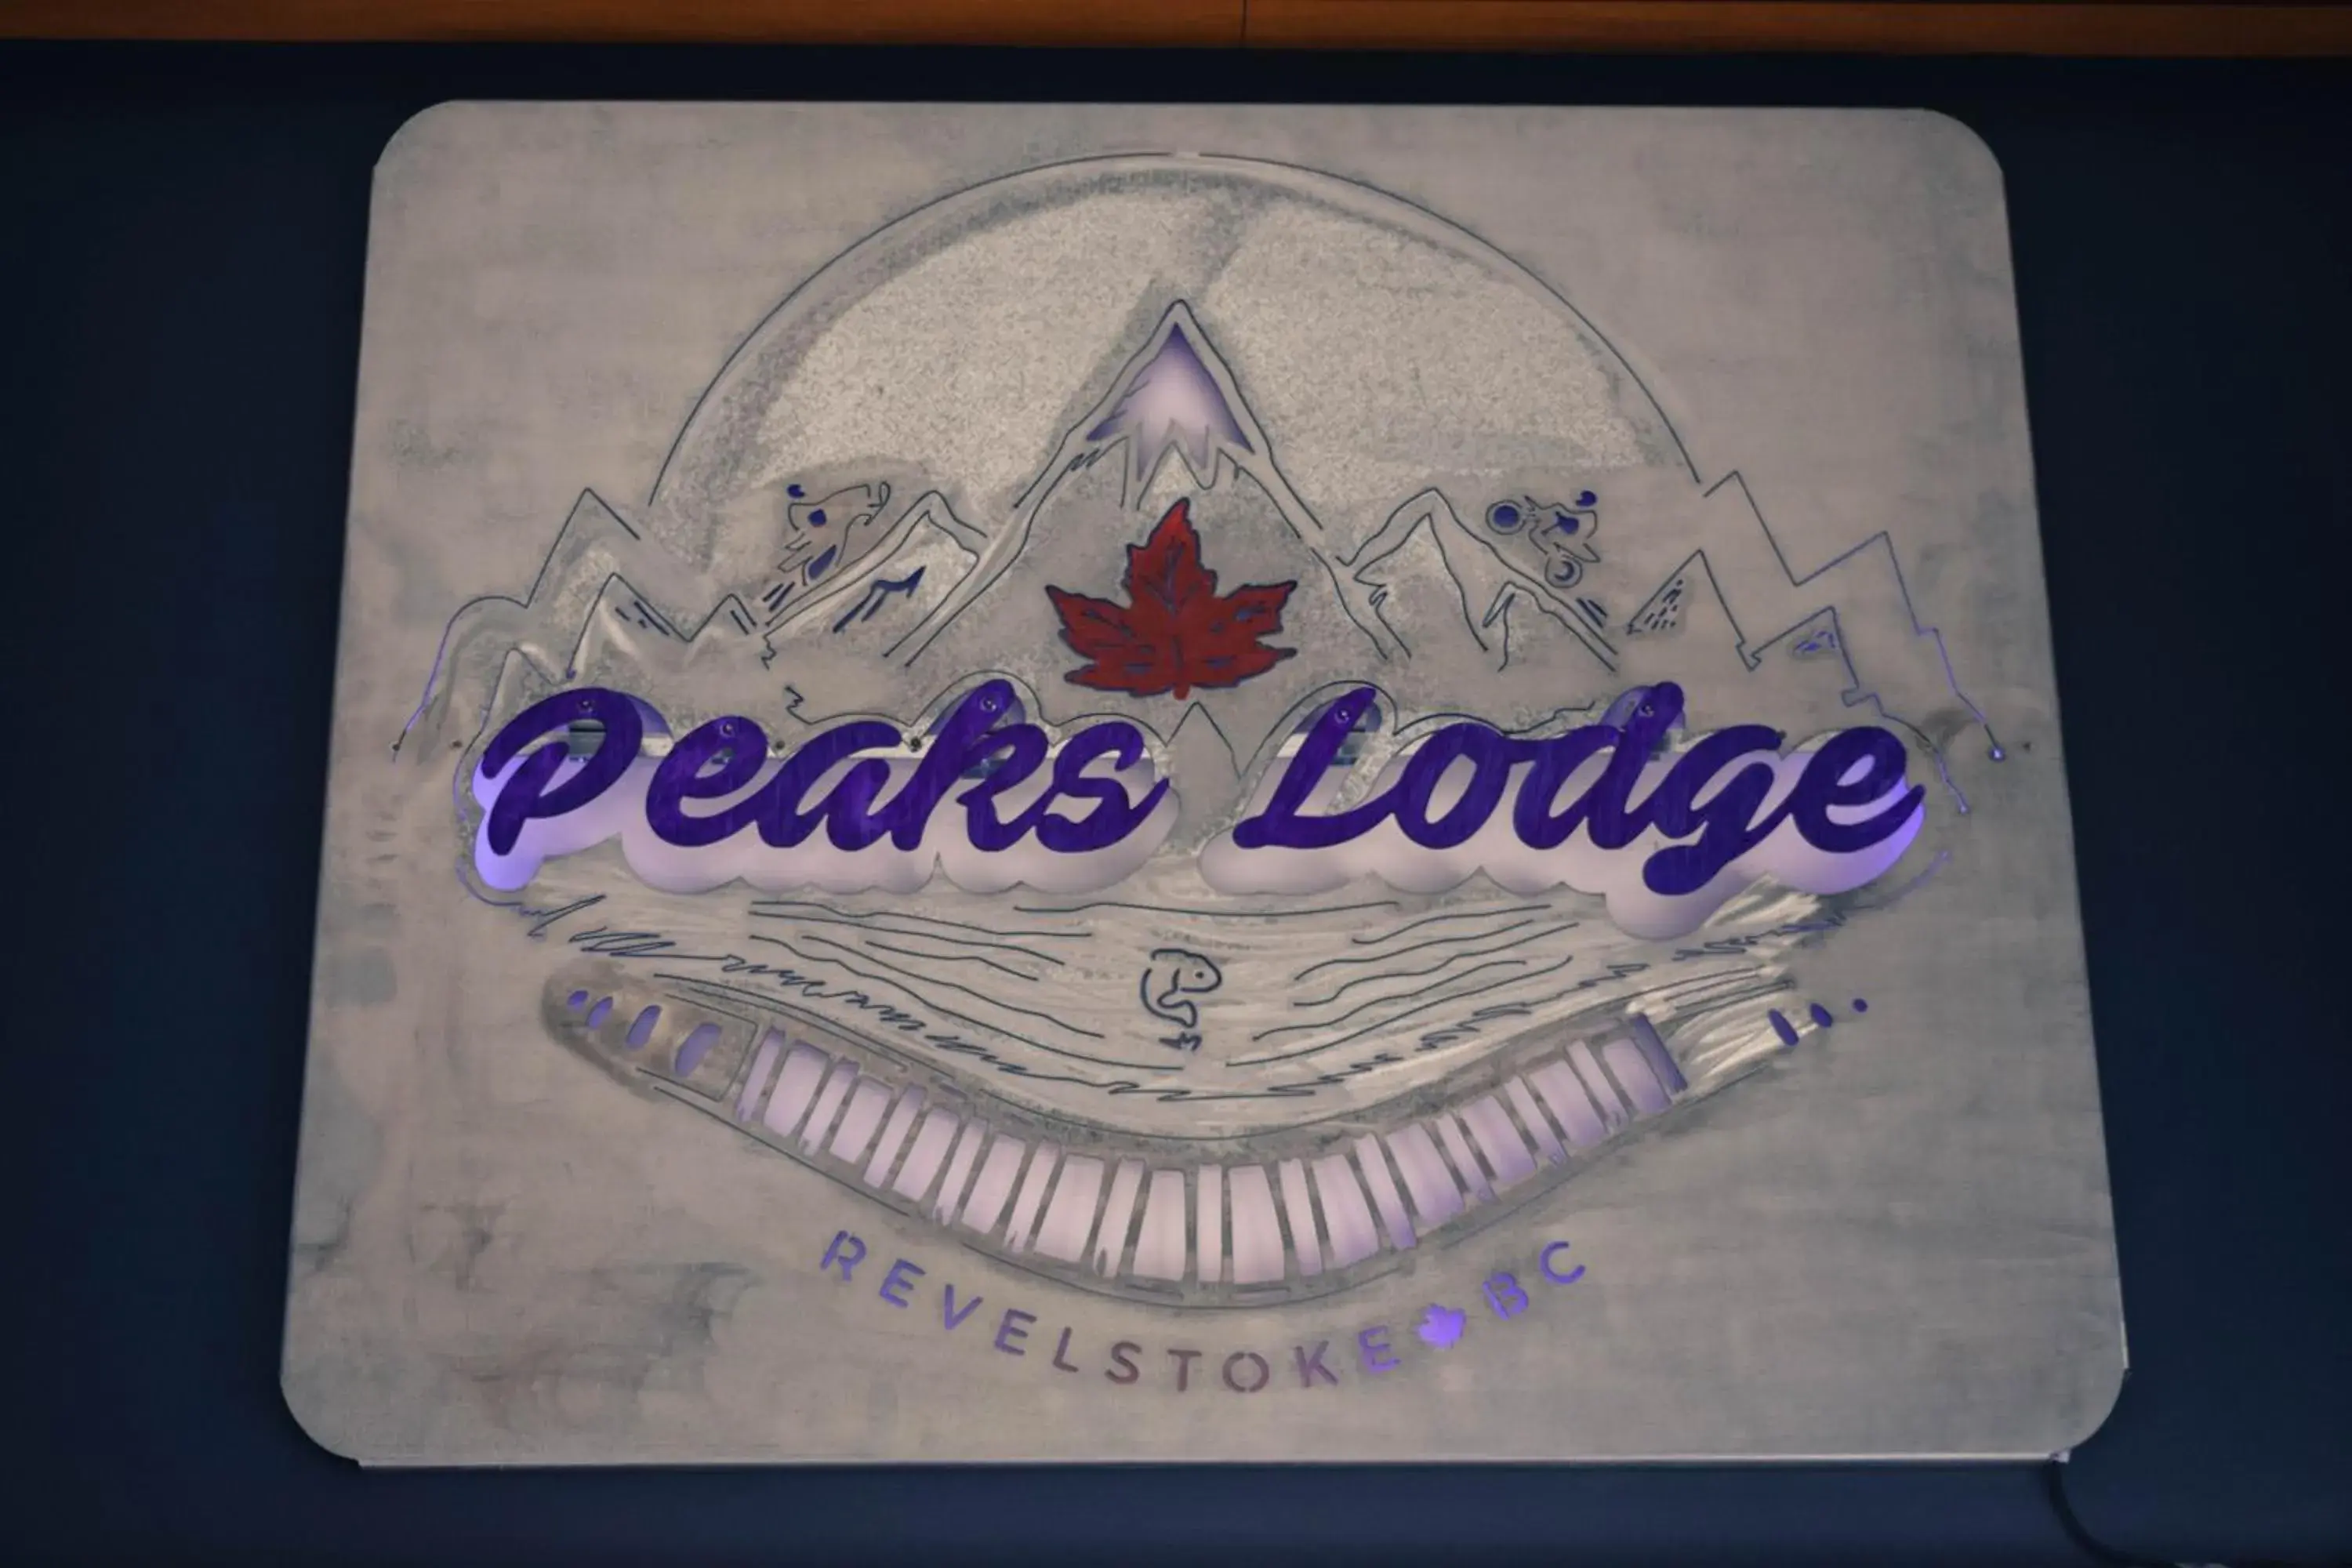 Property logo or sign in Peaks Lodge